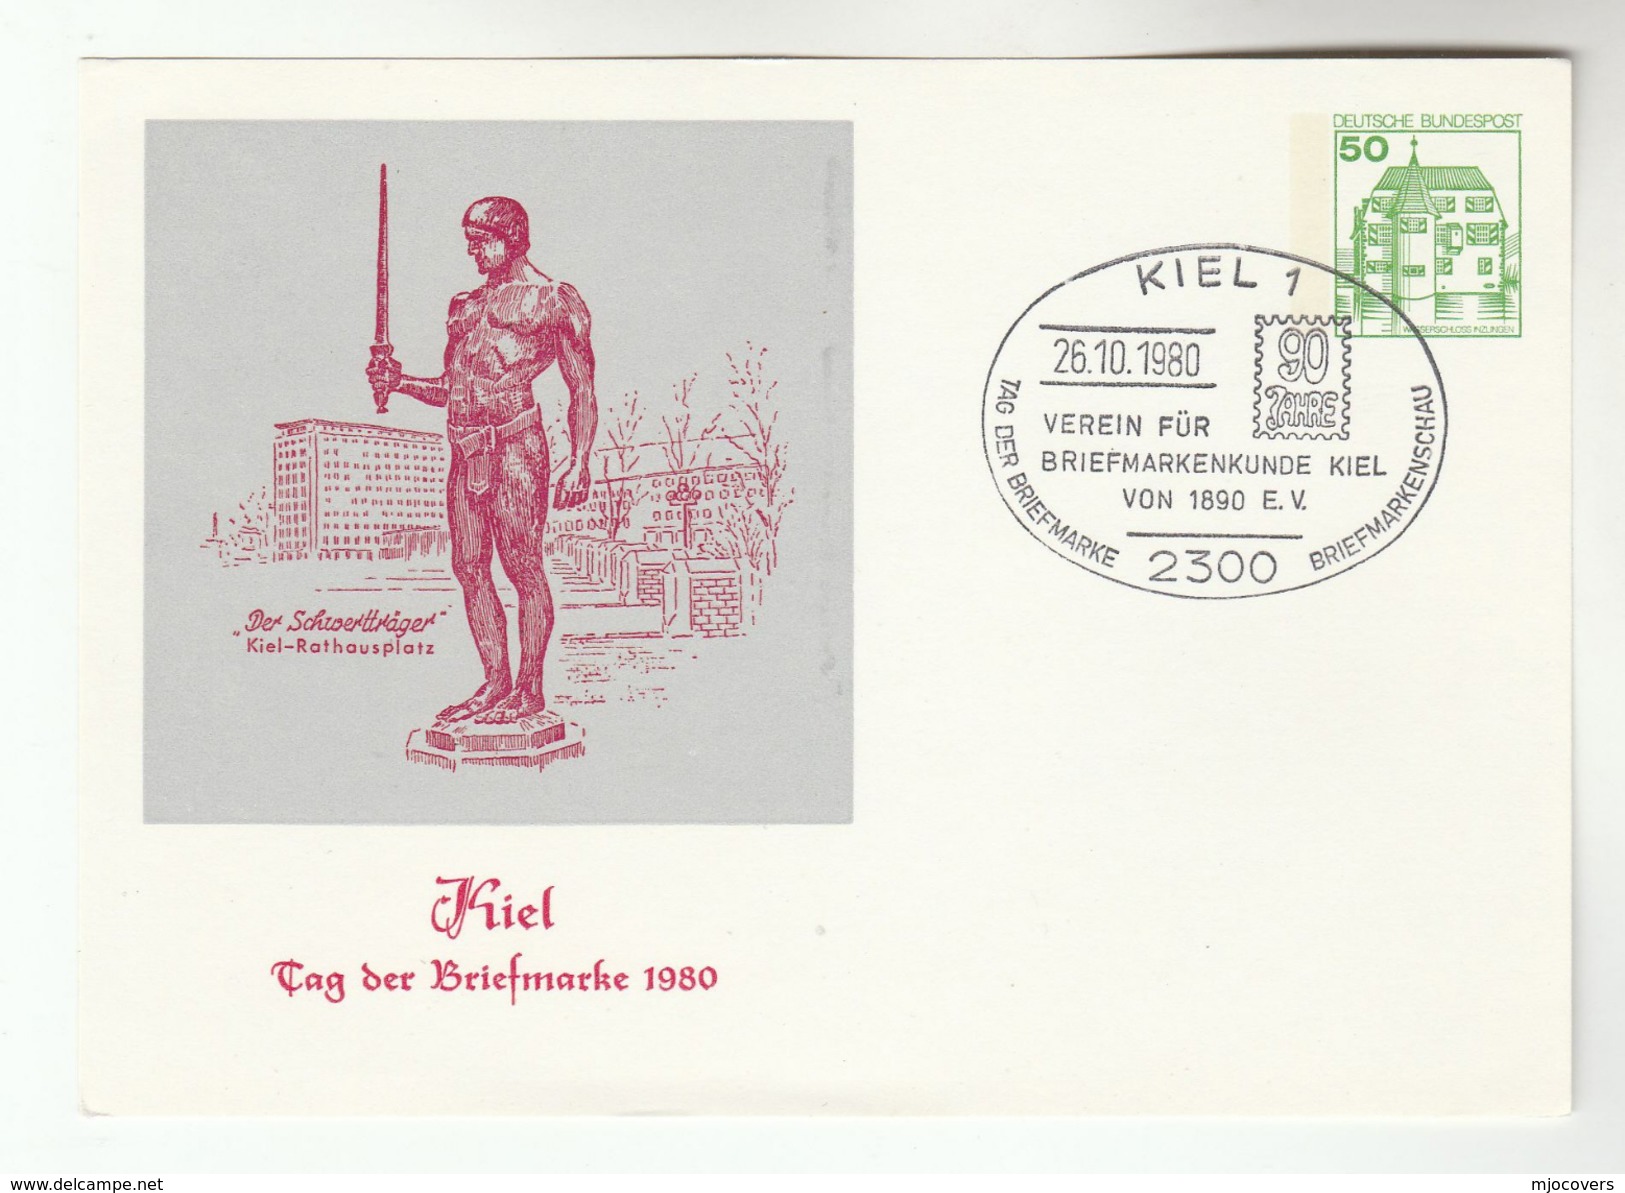 1980 Germany STAMPS SHOW  EVENT Illus POSTAL STATIONERY CARD Kiel DER SCHWERTTRAGER STATUE Cover Philately Stamps - Philatelic Exhibitions